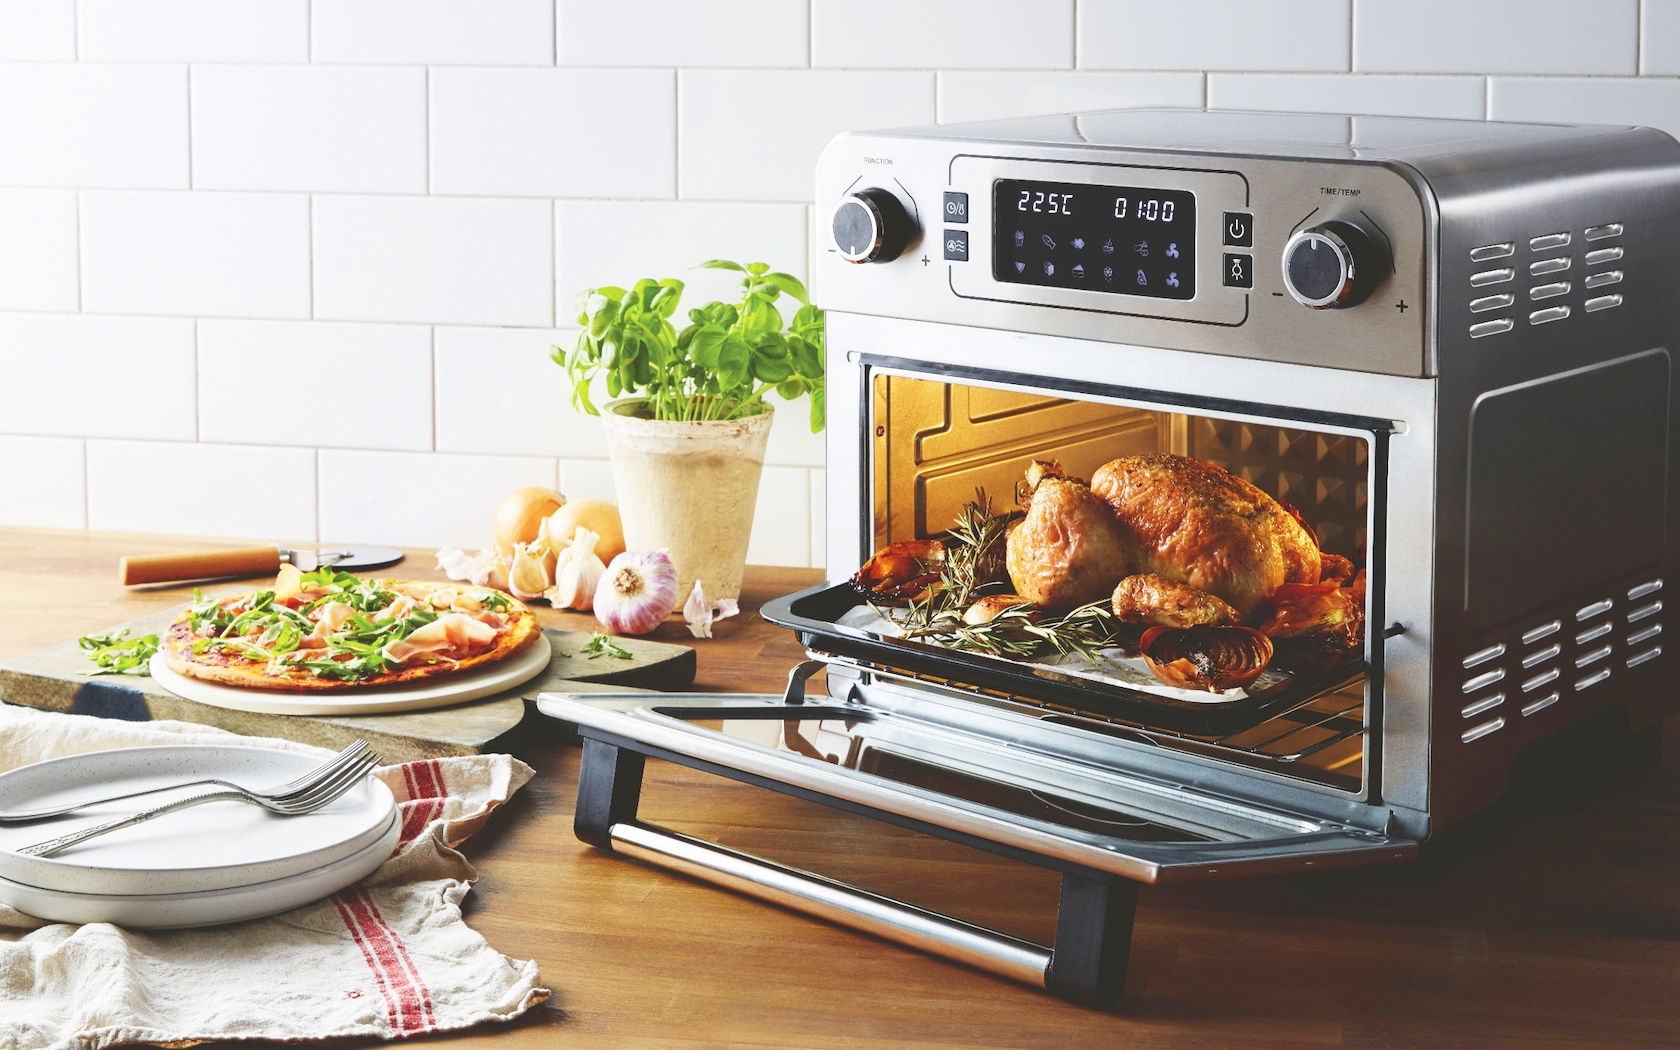 Aldi Special Buys Air Fryer Is On Sale For $149 This Week Only